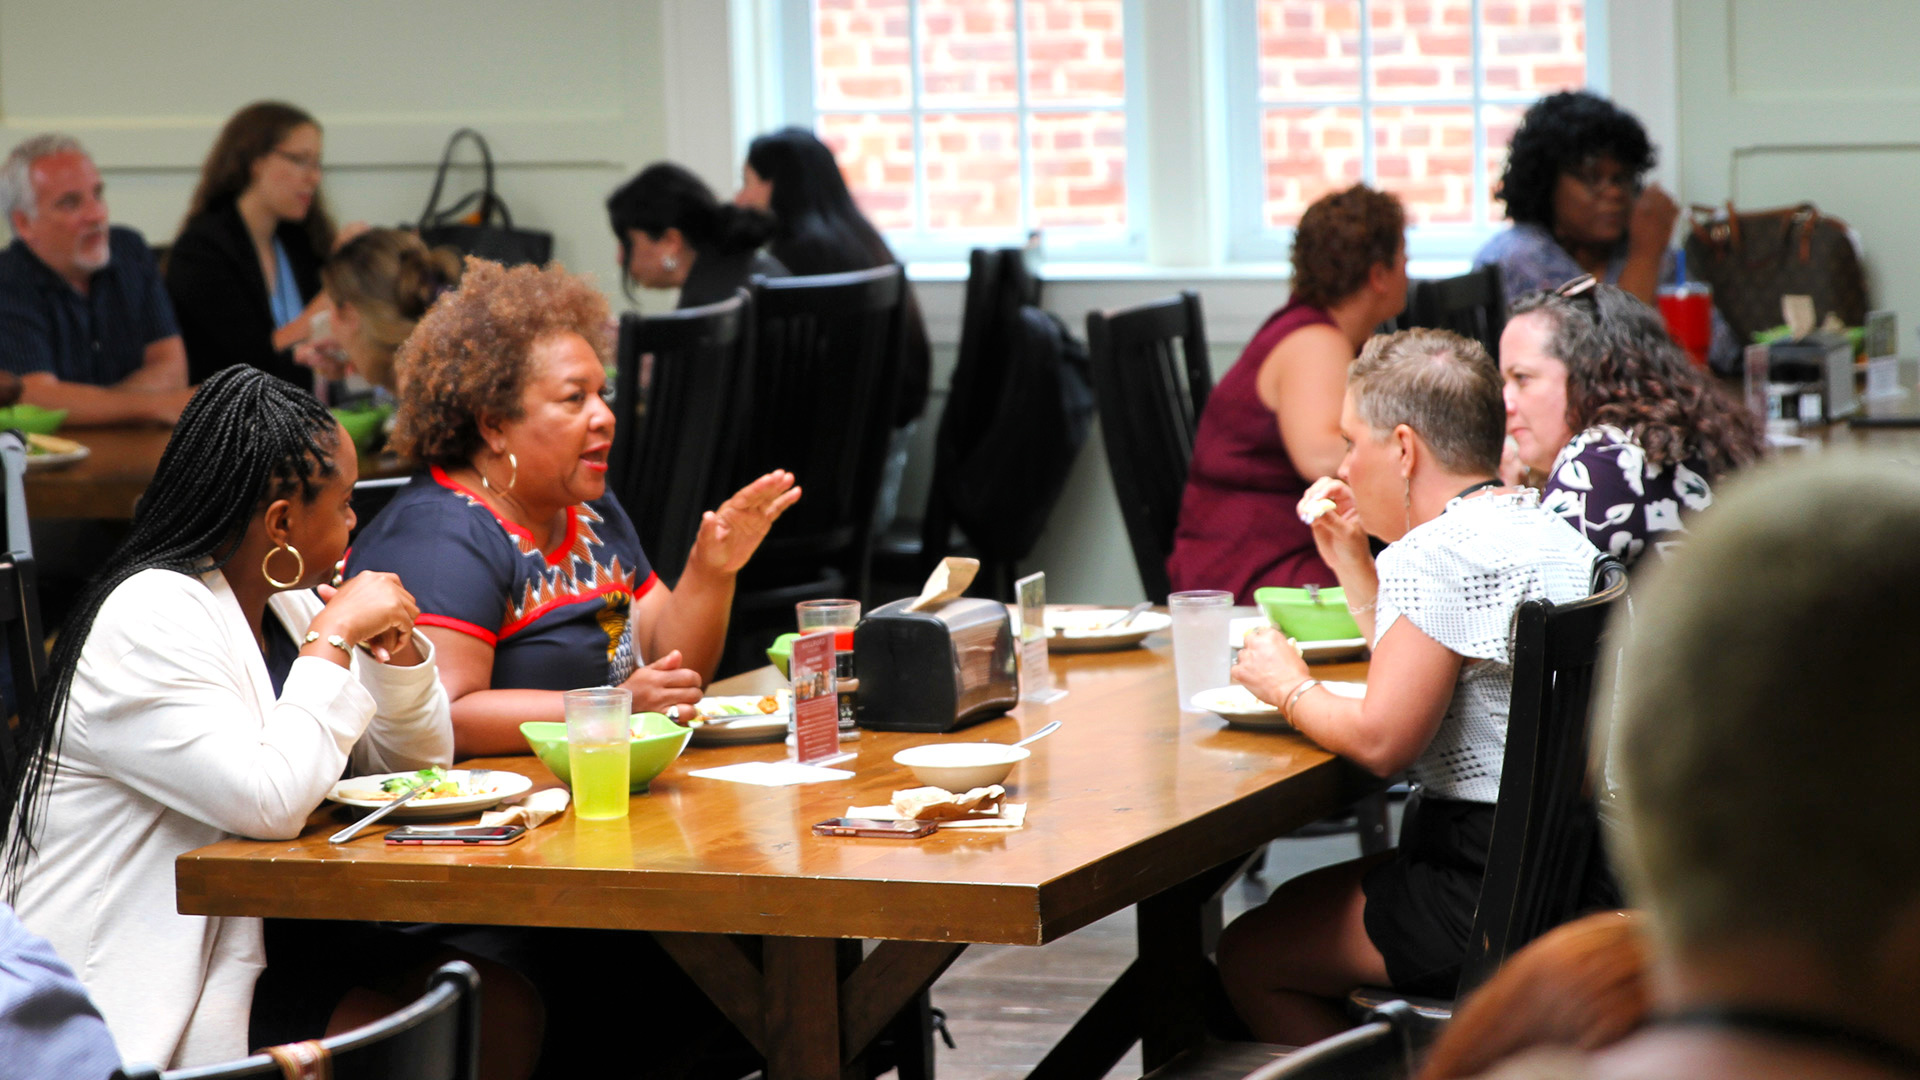 Attendees chat at tables during lunch in the Dining Hall at the Guilford Dialogues.